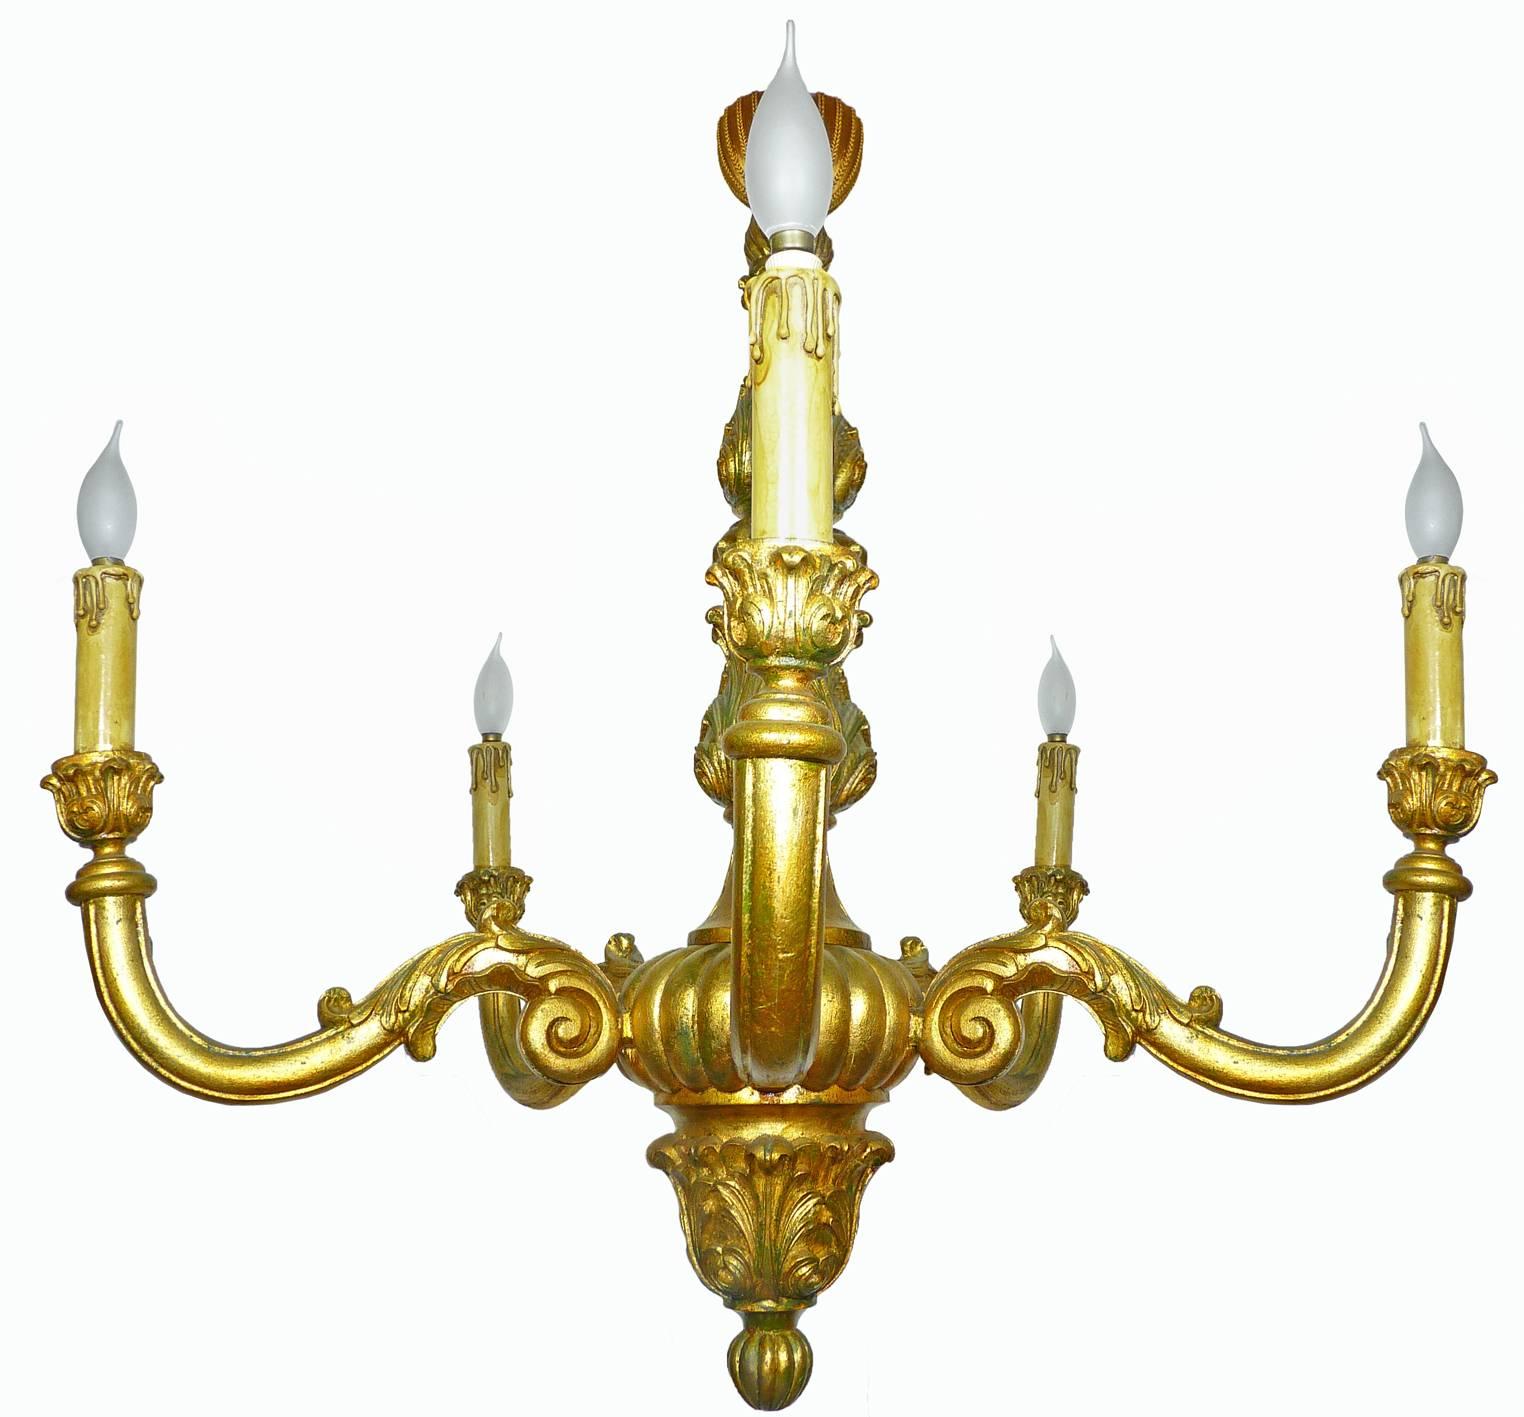 Neoclassical Large Neoclassic Wood Carved Gold Leaf Baroque Giltwood Five-Arm Chandelier